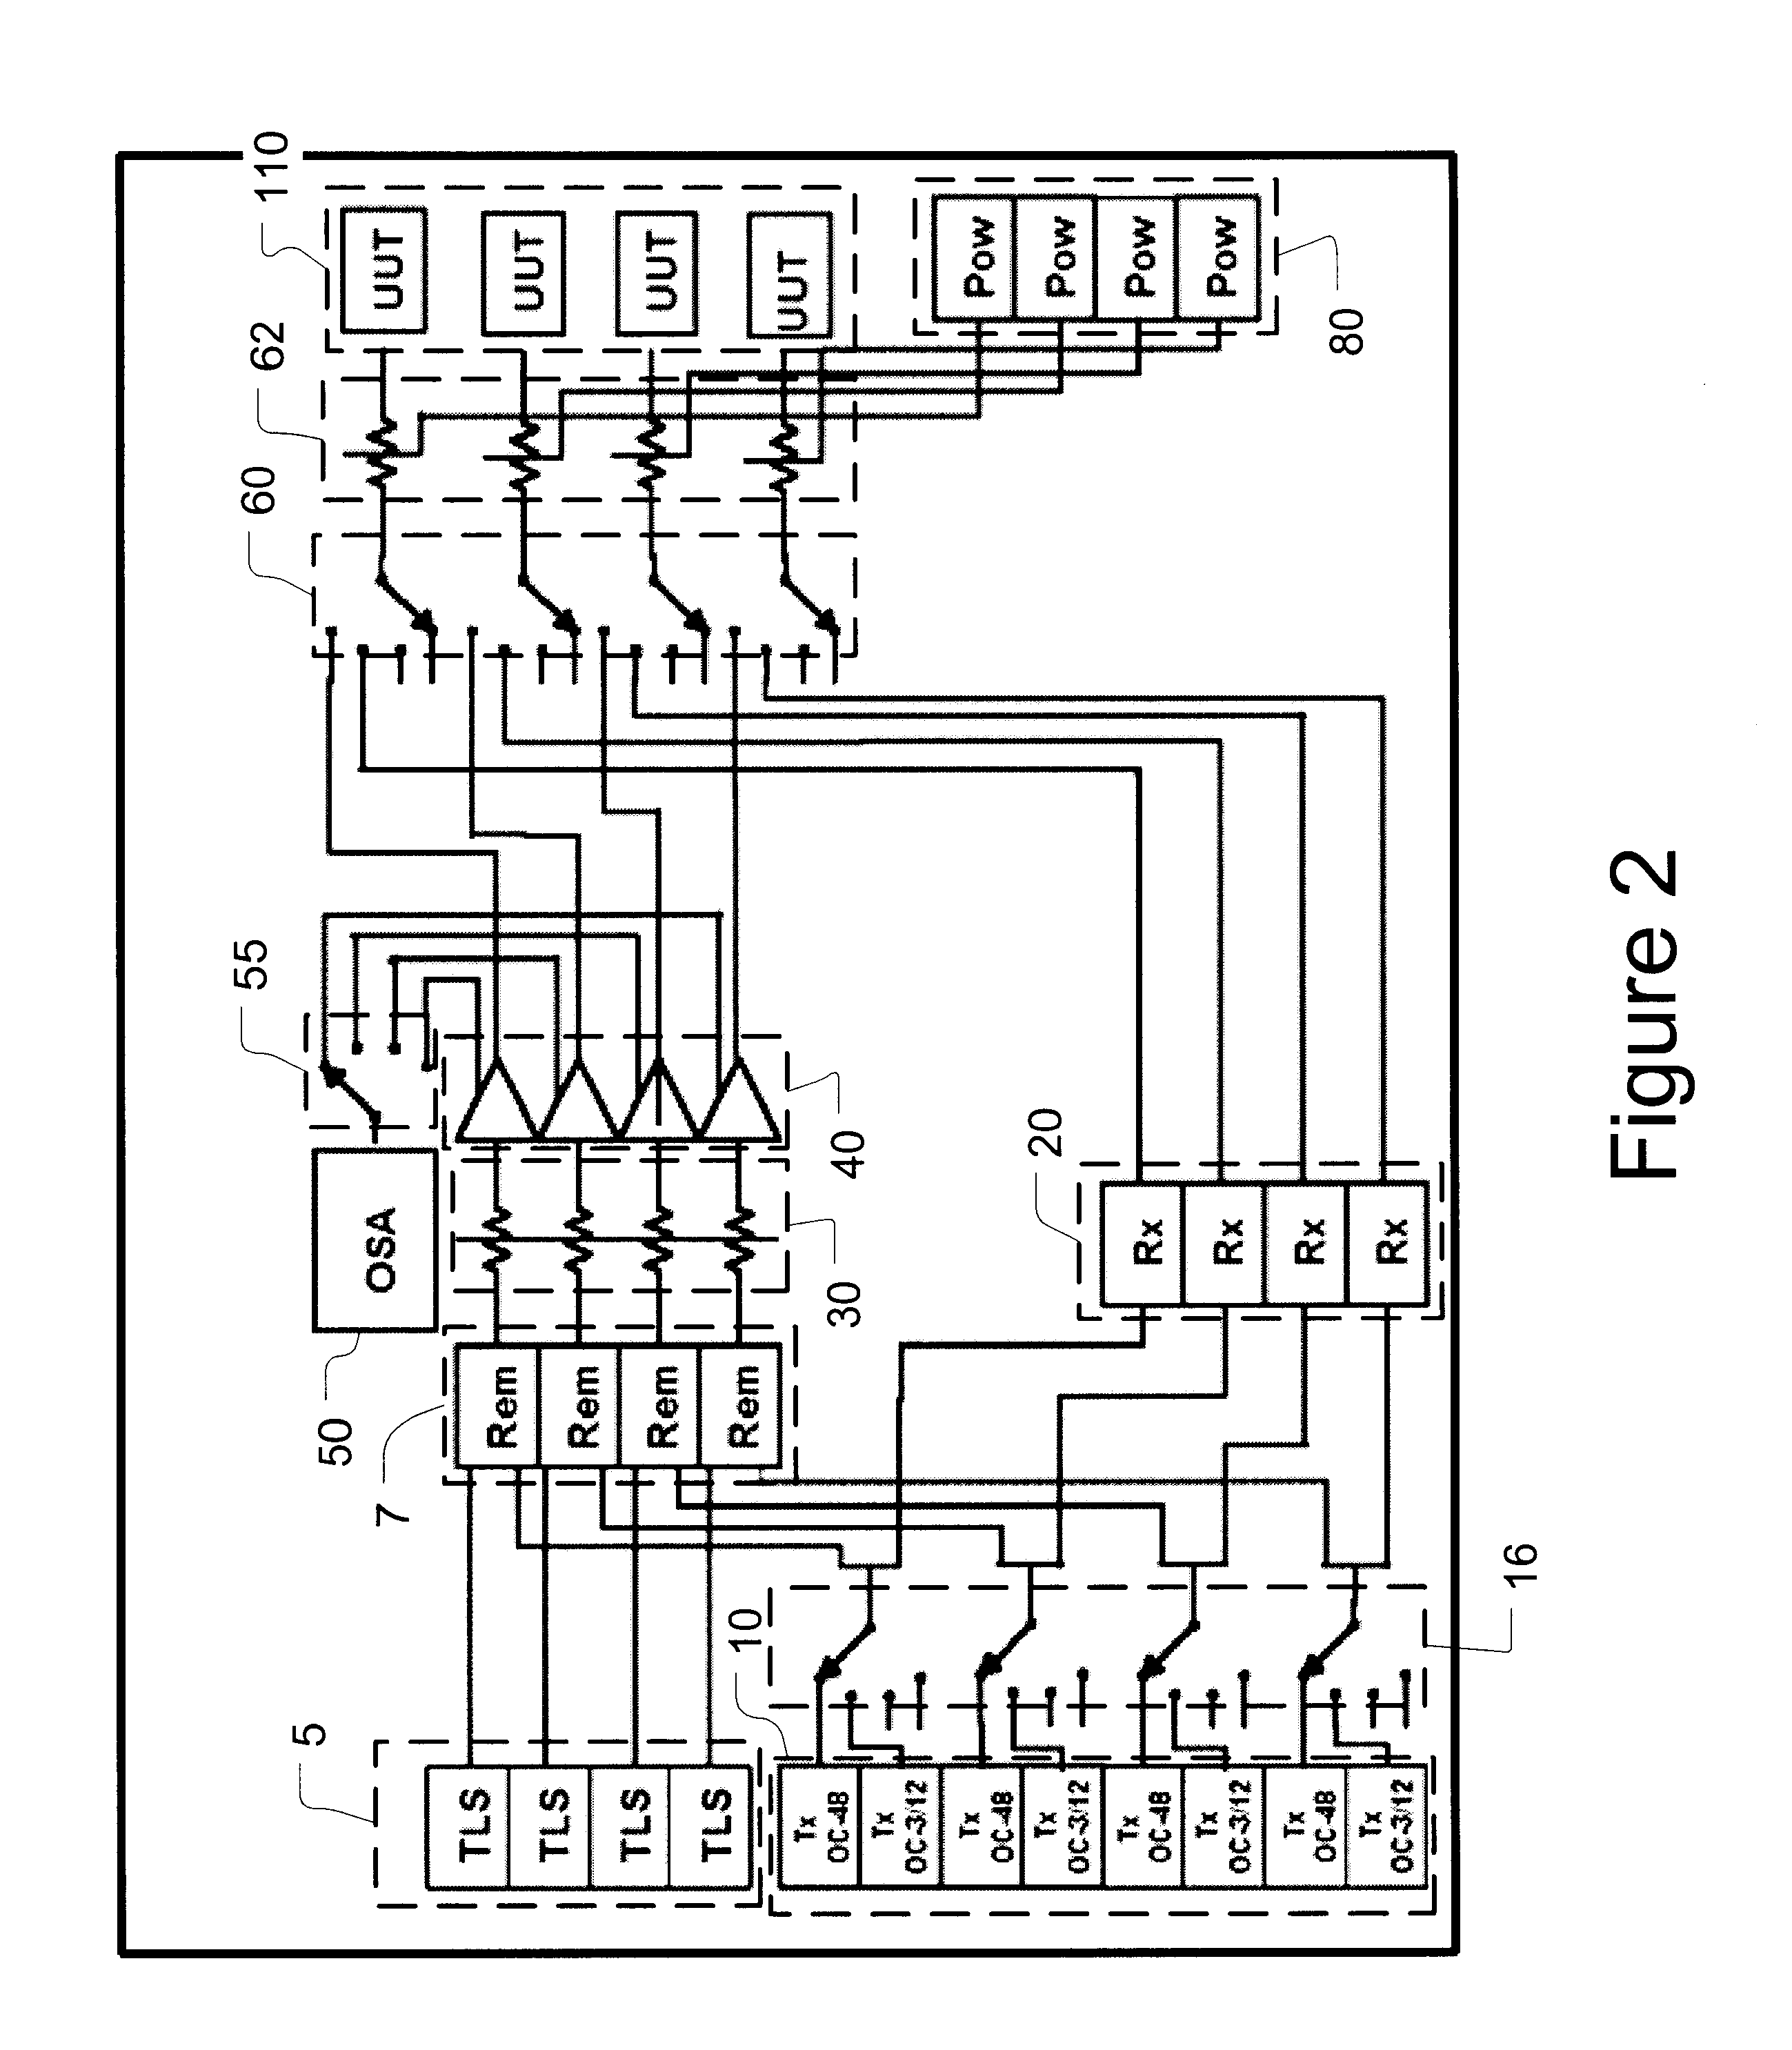 Method and apparatus for performing parallel asynchronous testing of optical modules